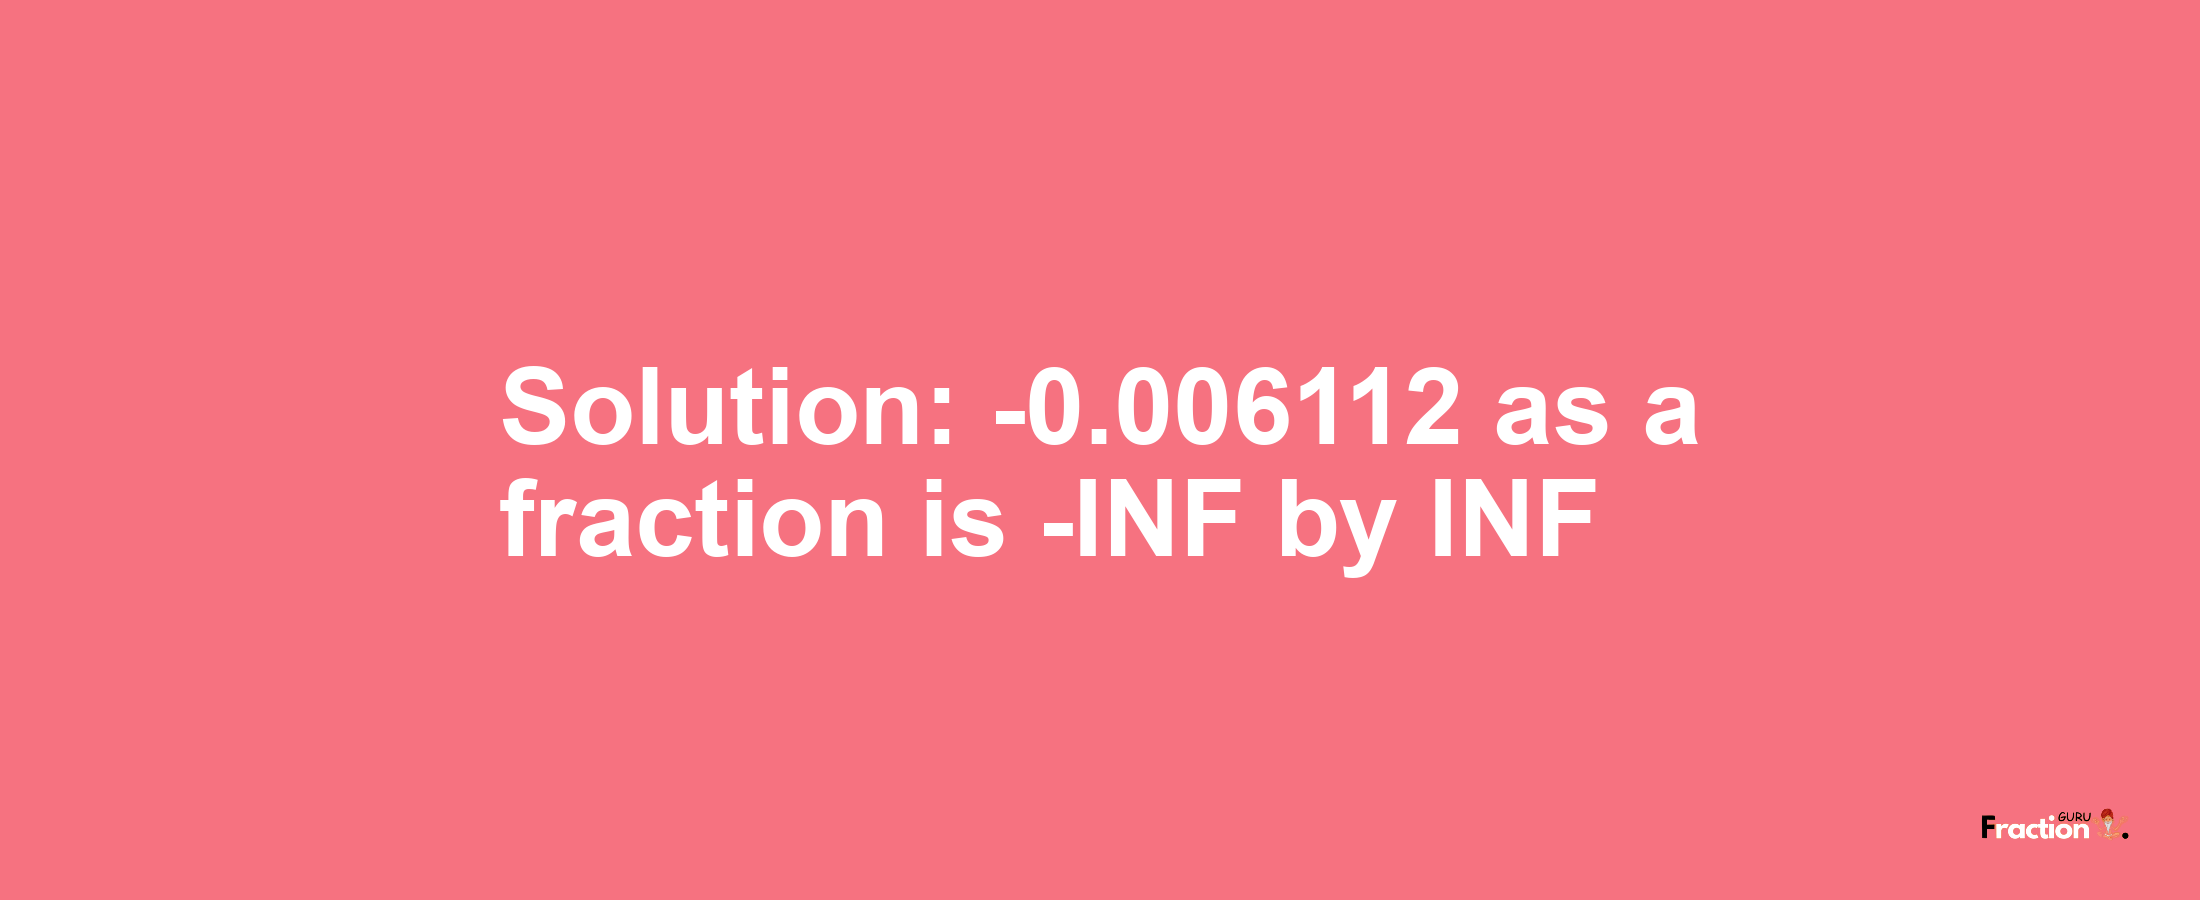 Solution:-0.006112 as a fraction is -INF/INF